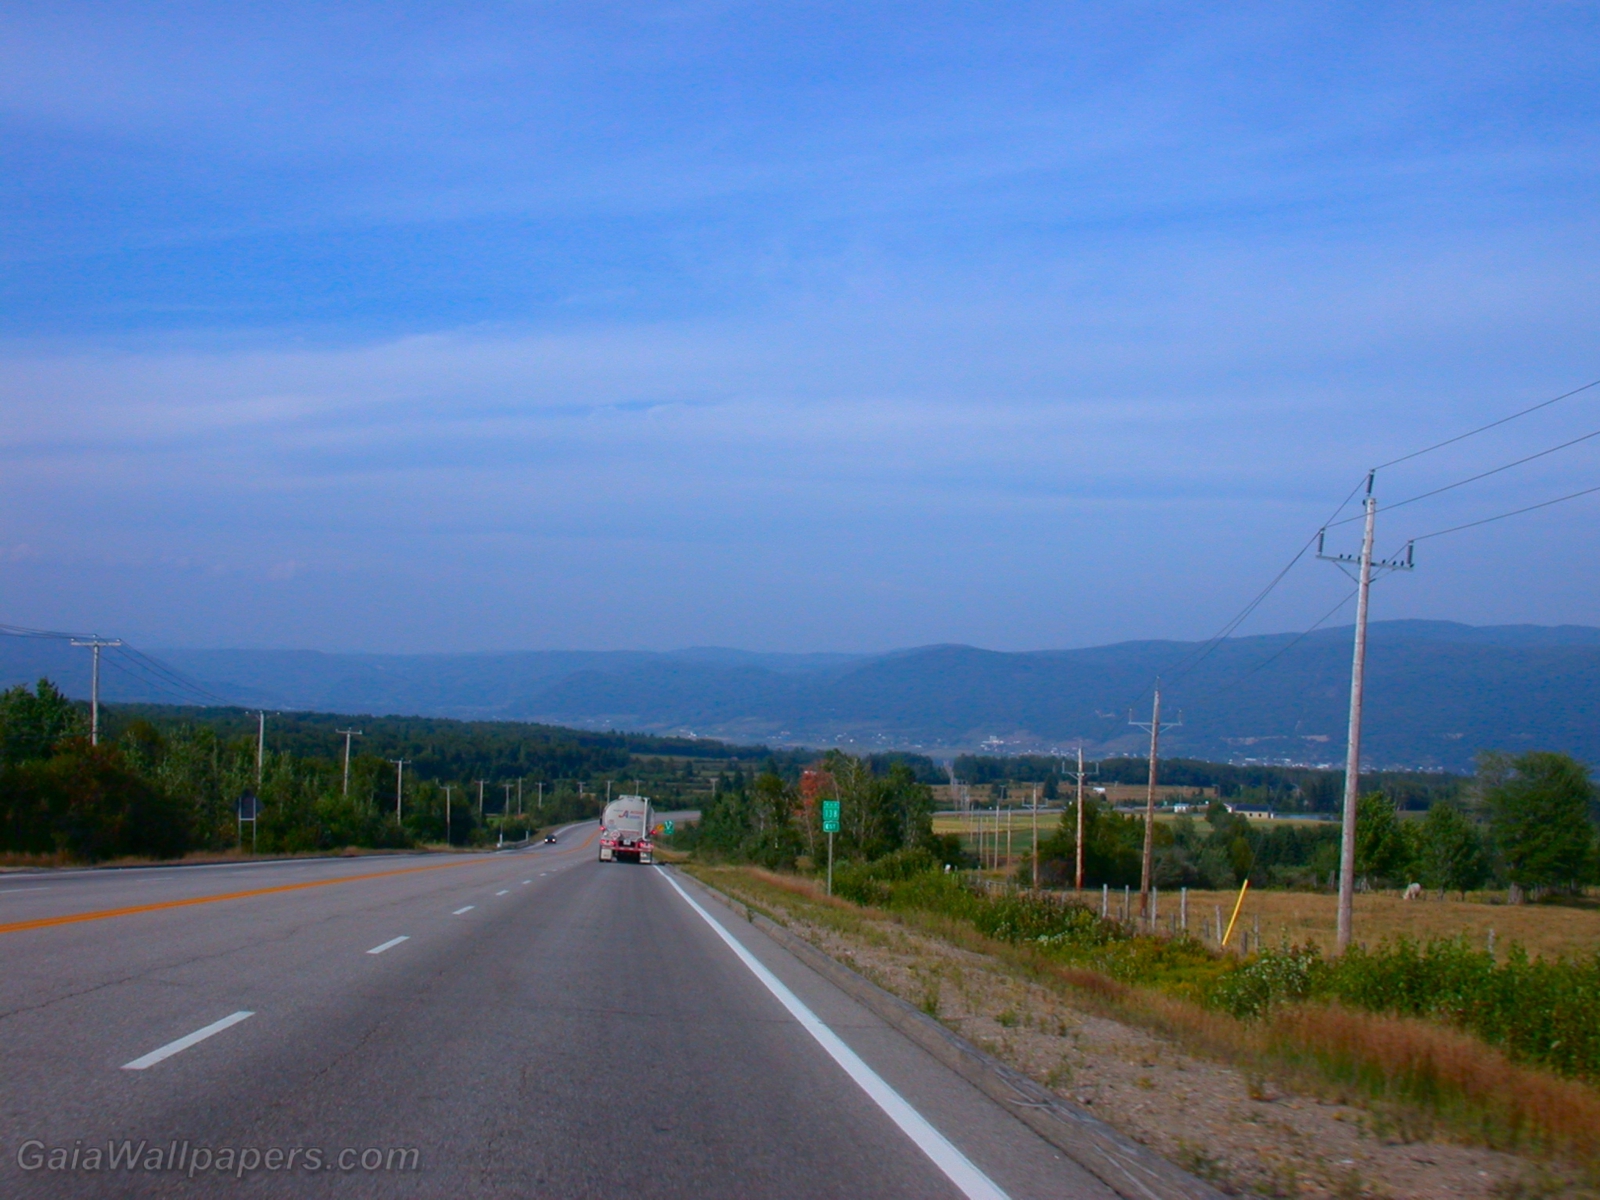 Driving on road 138 in Charlevoix - Free desktop wallpapers